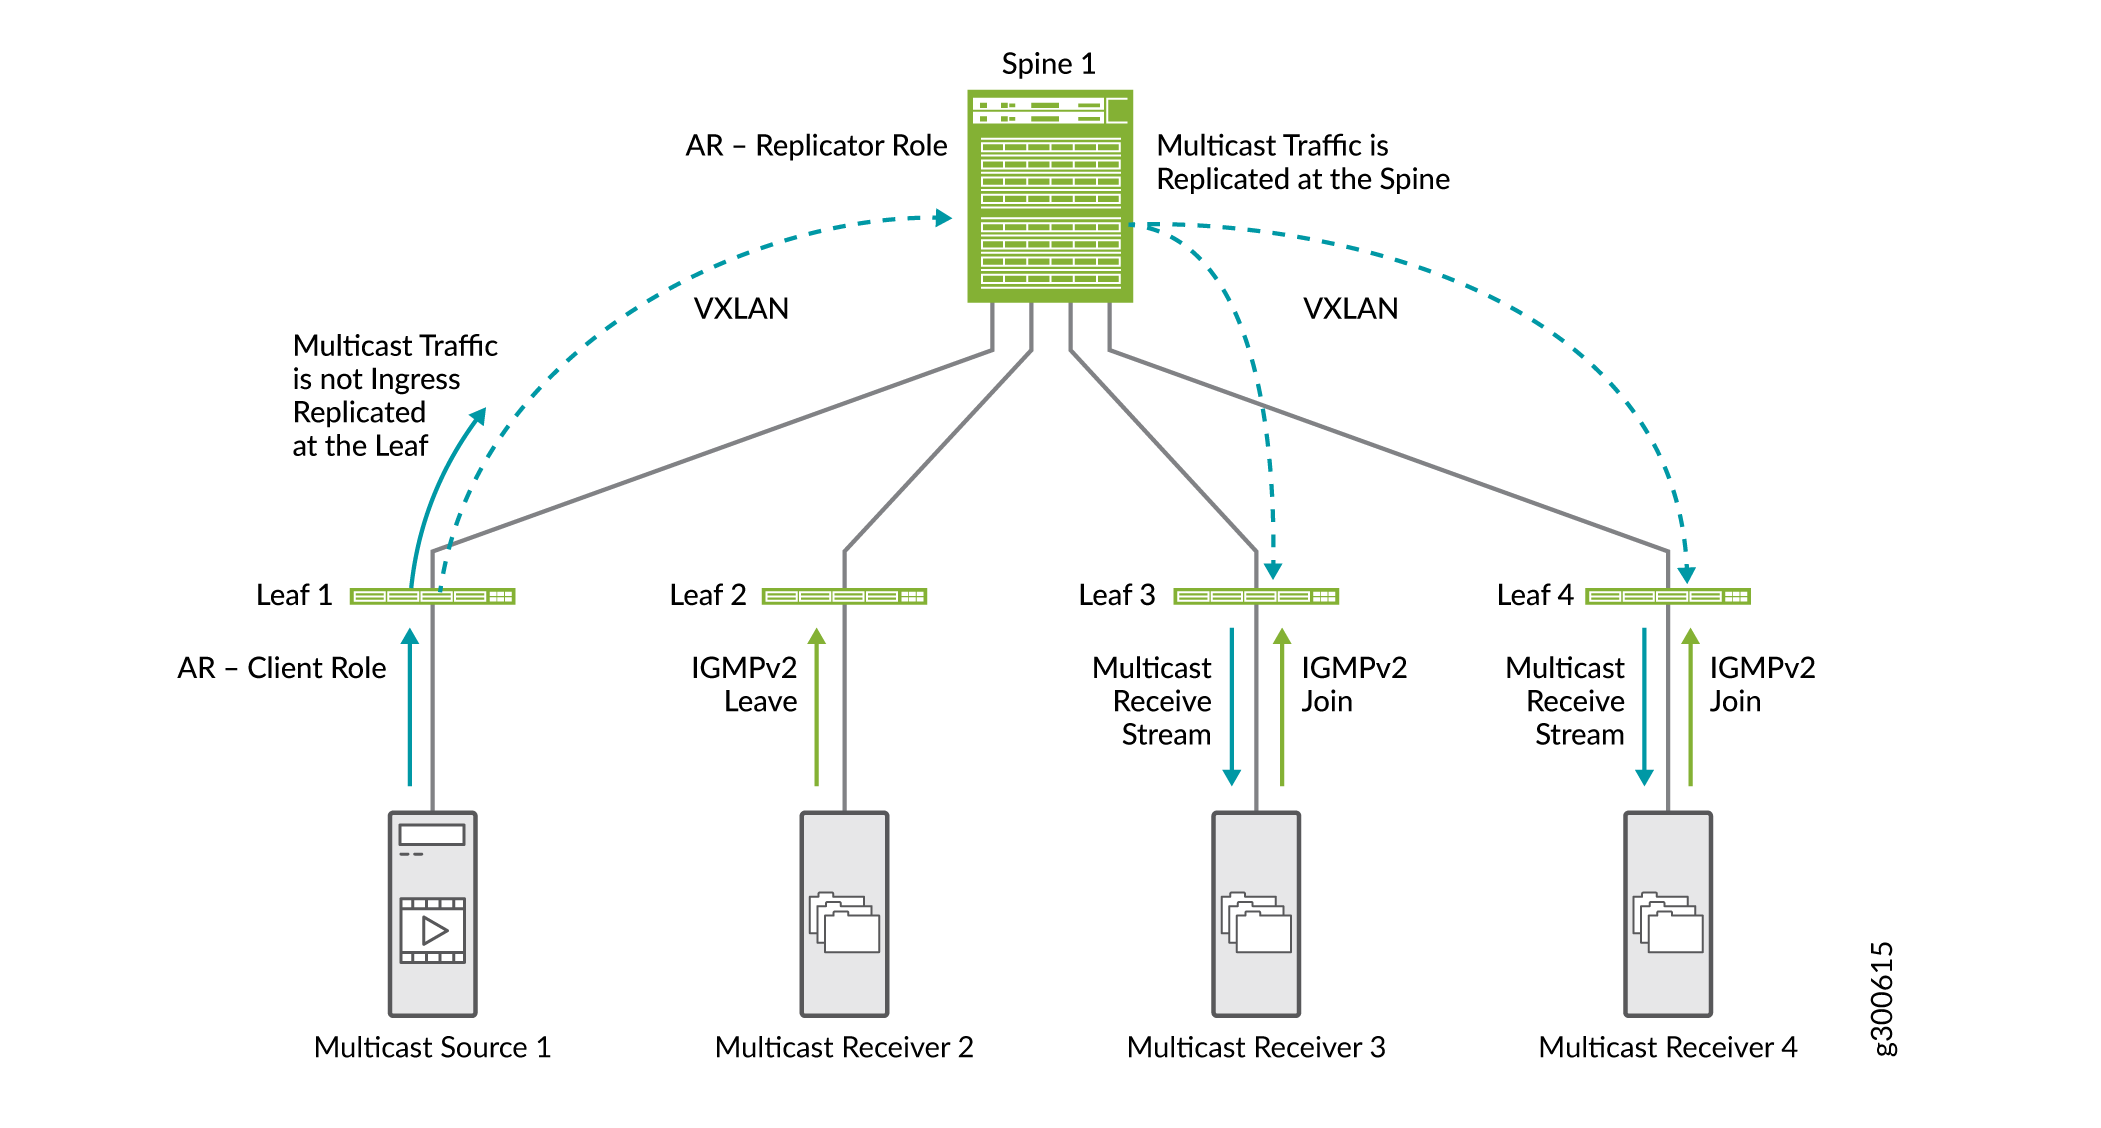 Multicast with AR, IGMP Snooping, and SMET